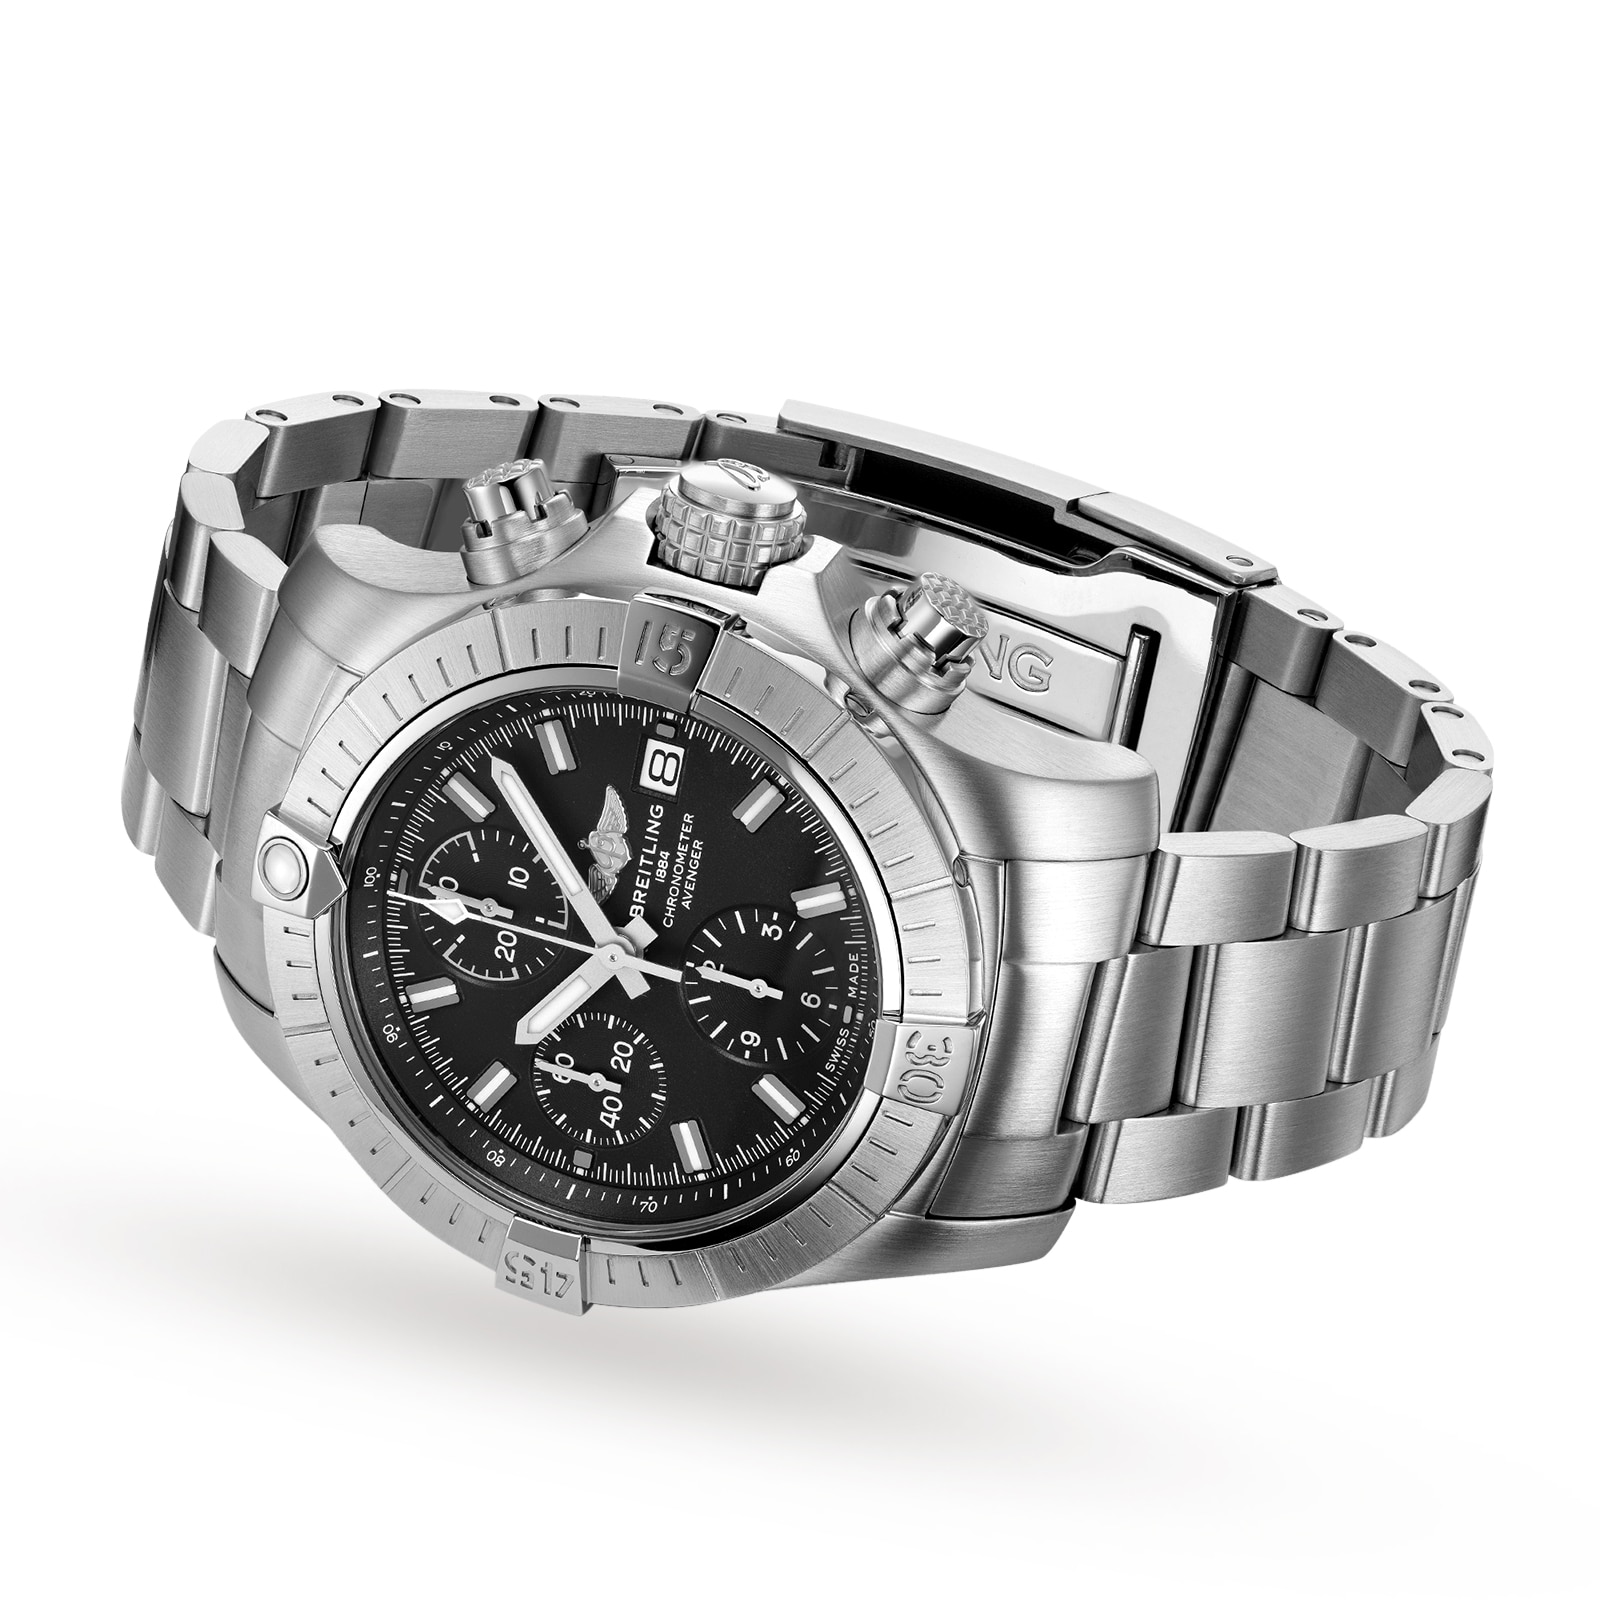 Breitling Avenger Chronograph 43 Stainless Steel Watch A13385101B1A1 ...